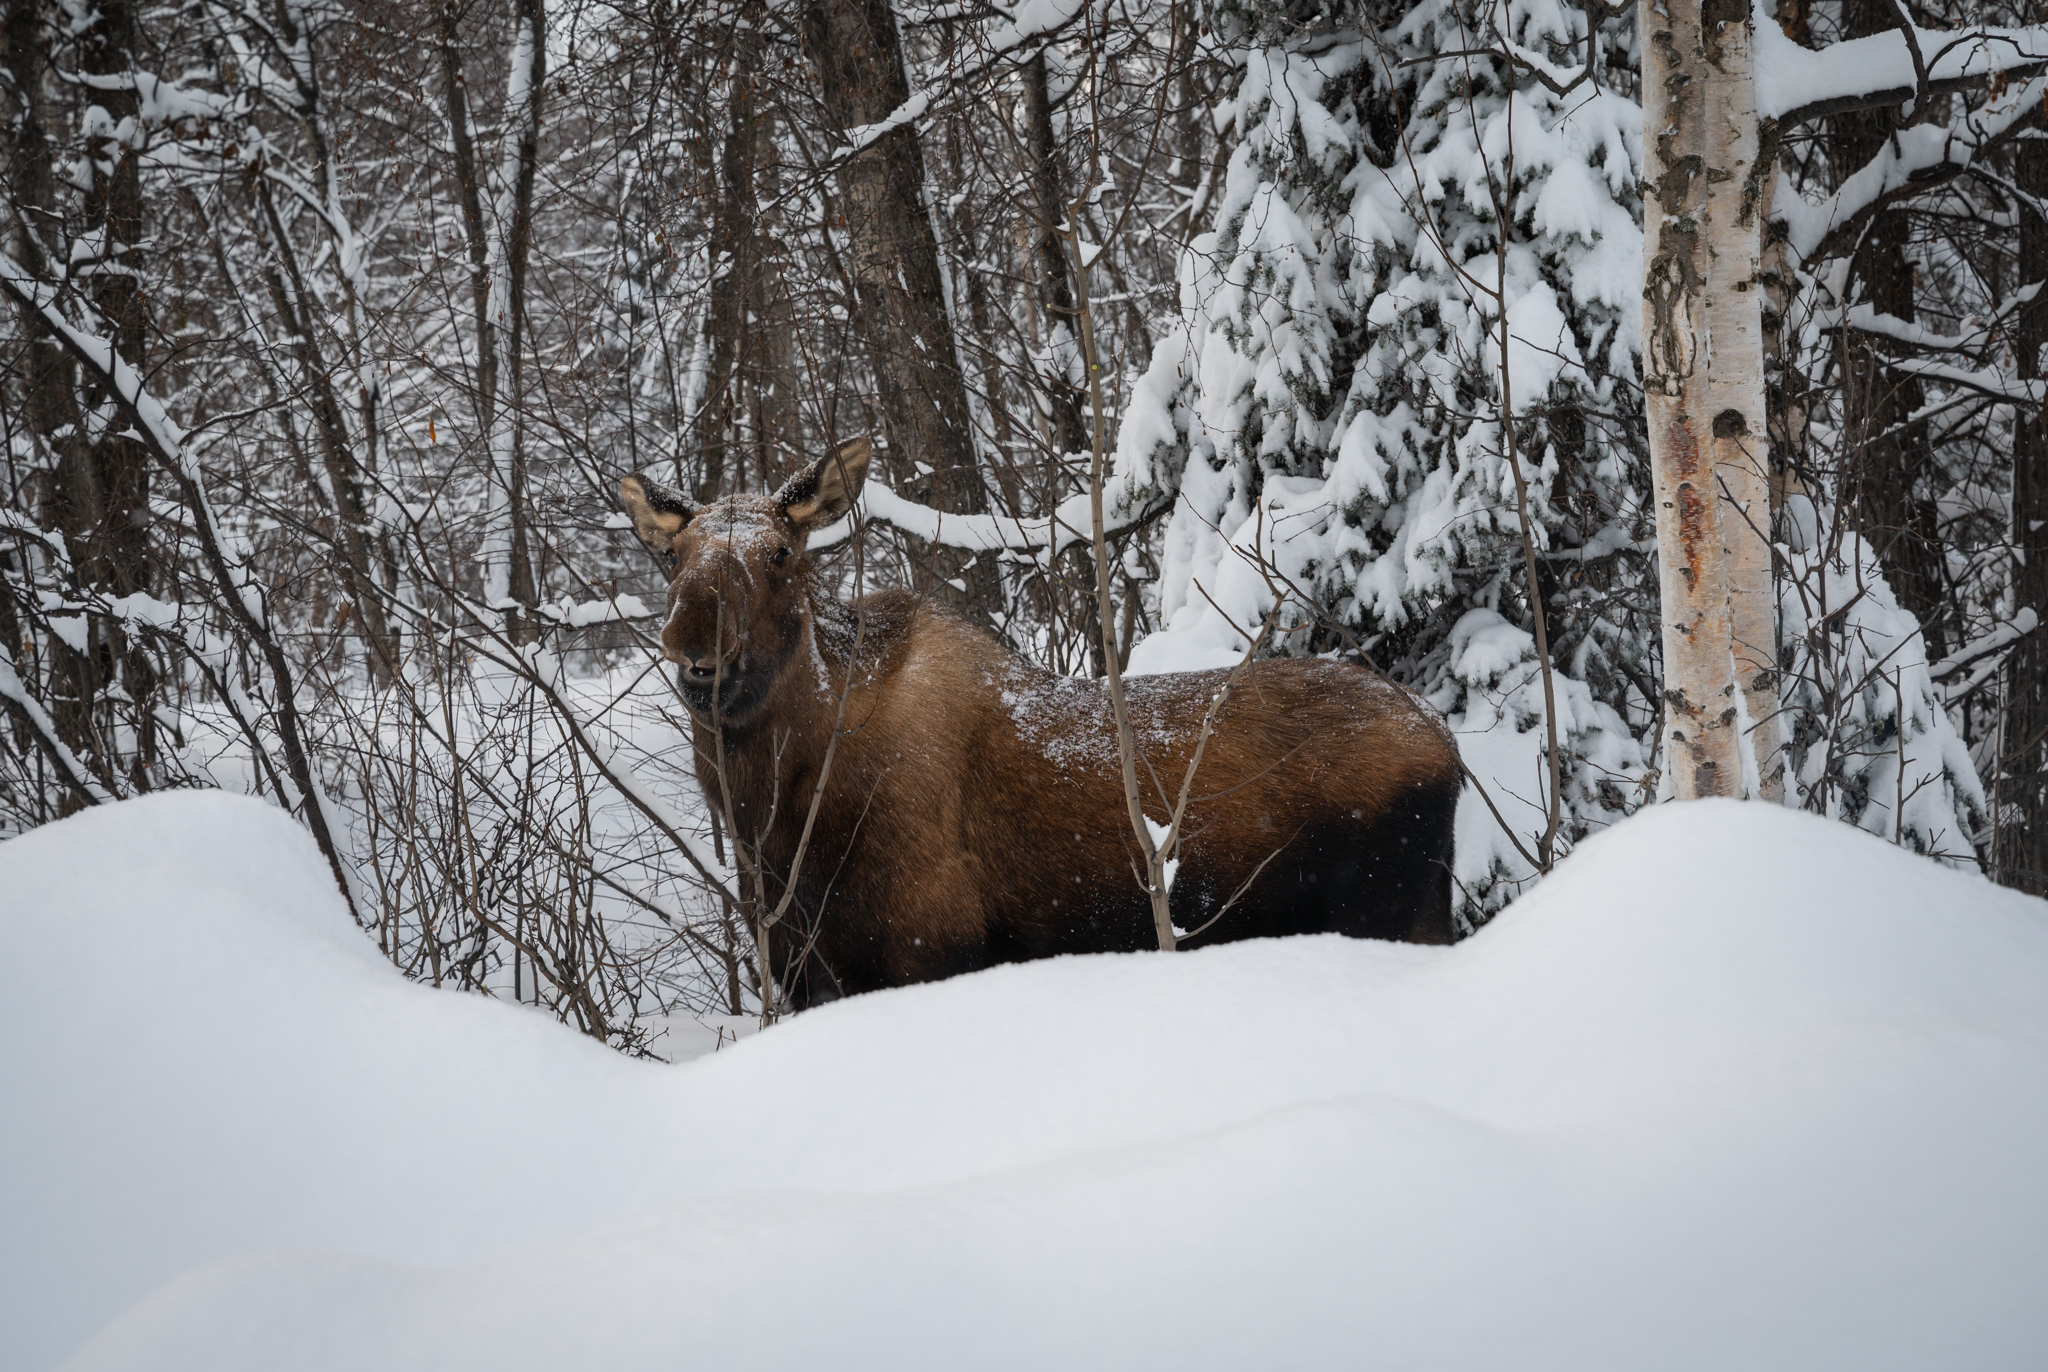 A moose eating branches in a snowbank